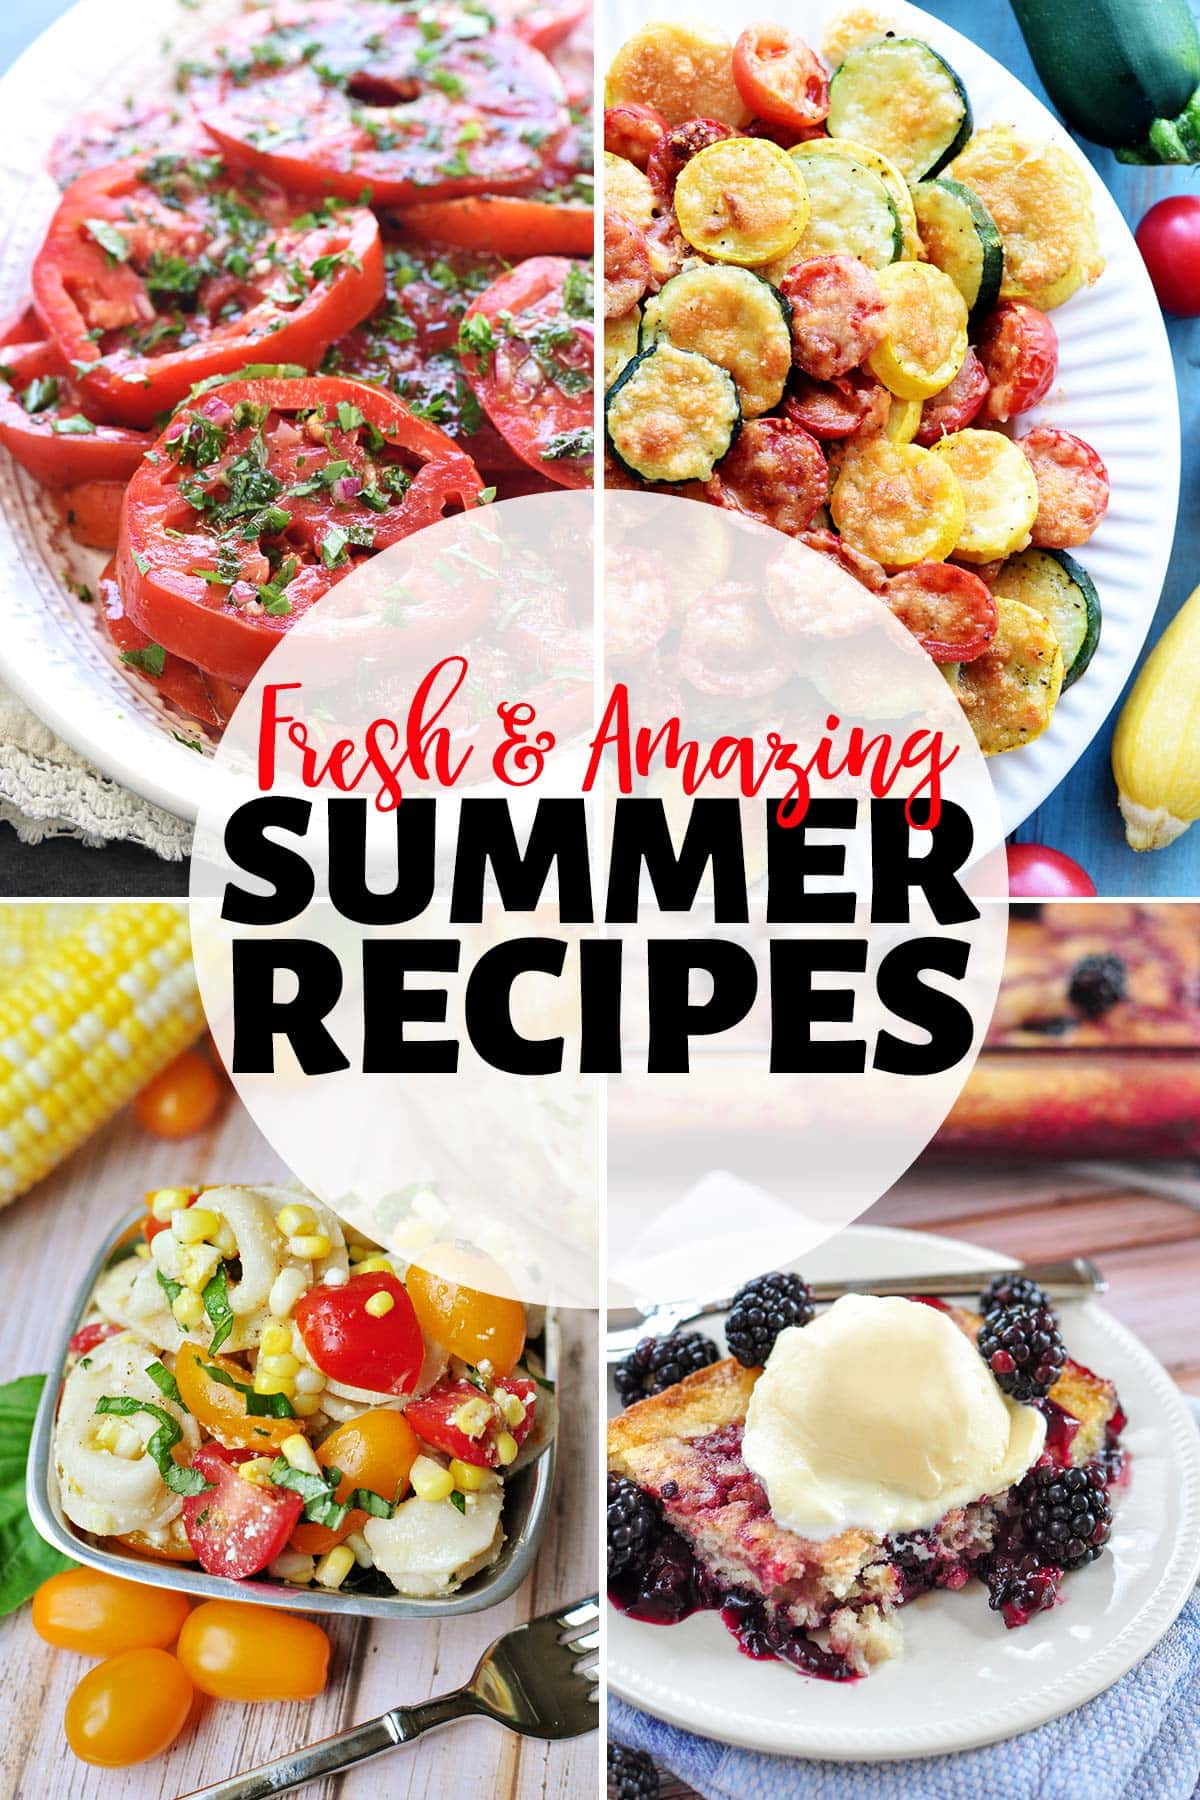 100+ AMAZING Summer Recipes ~ this scrumptious collection of seasonal recipes showcases fresh summer produce and warm weather favorites, ranging from lighter fare to grilling grub, pasta salads to summer salad recipes, refreshing drinks to fruity desserts, and so much more! These fabulous summer recipes are fresh, simple, made from scratch, and incredibly delicious. | FiveHeartHome.com via @fivehearthome